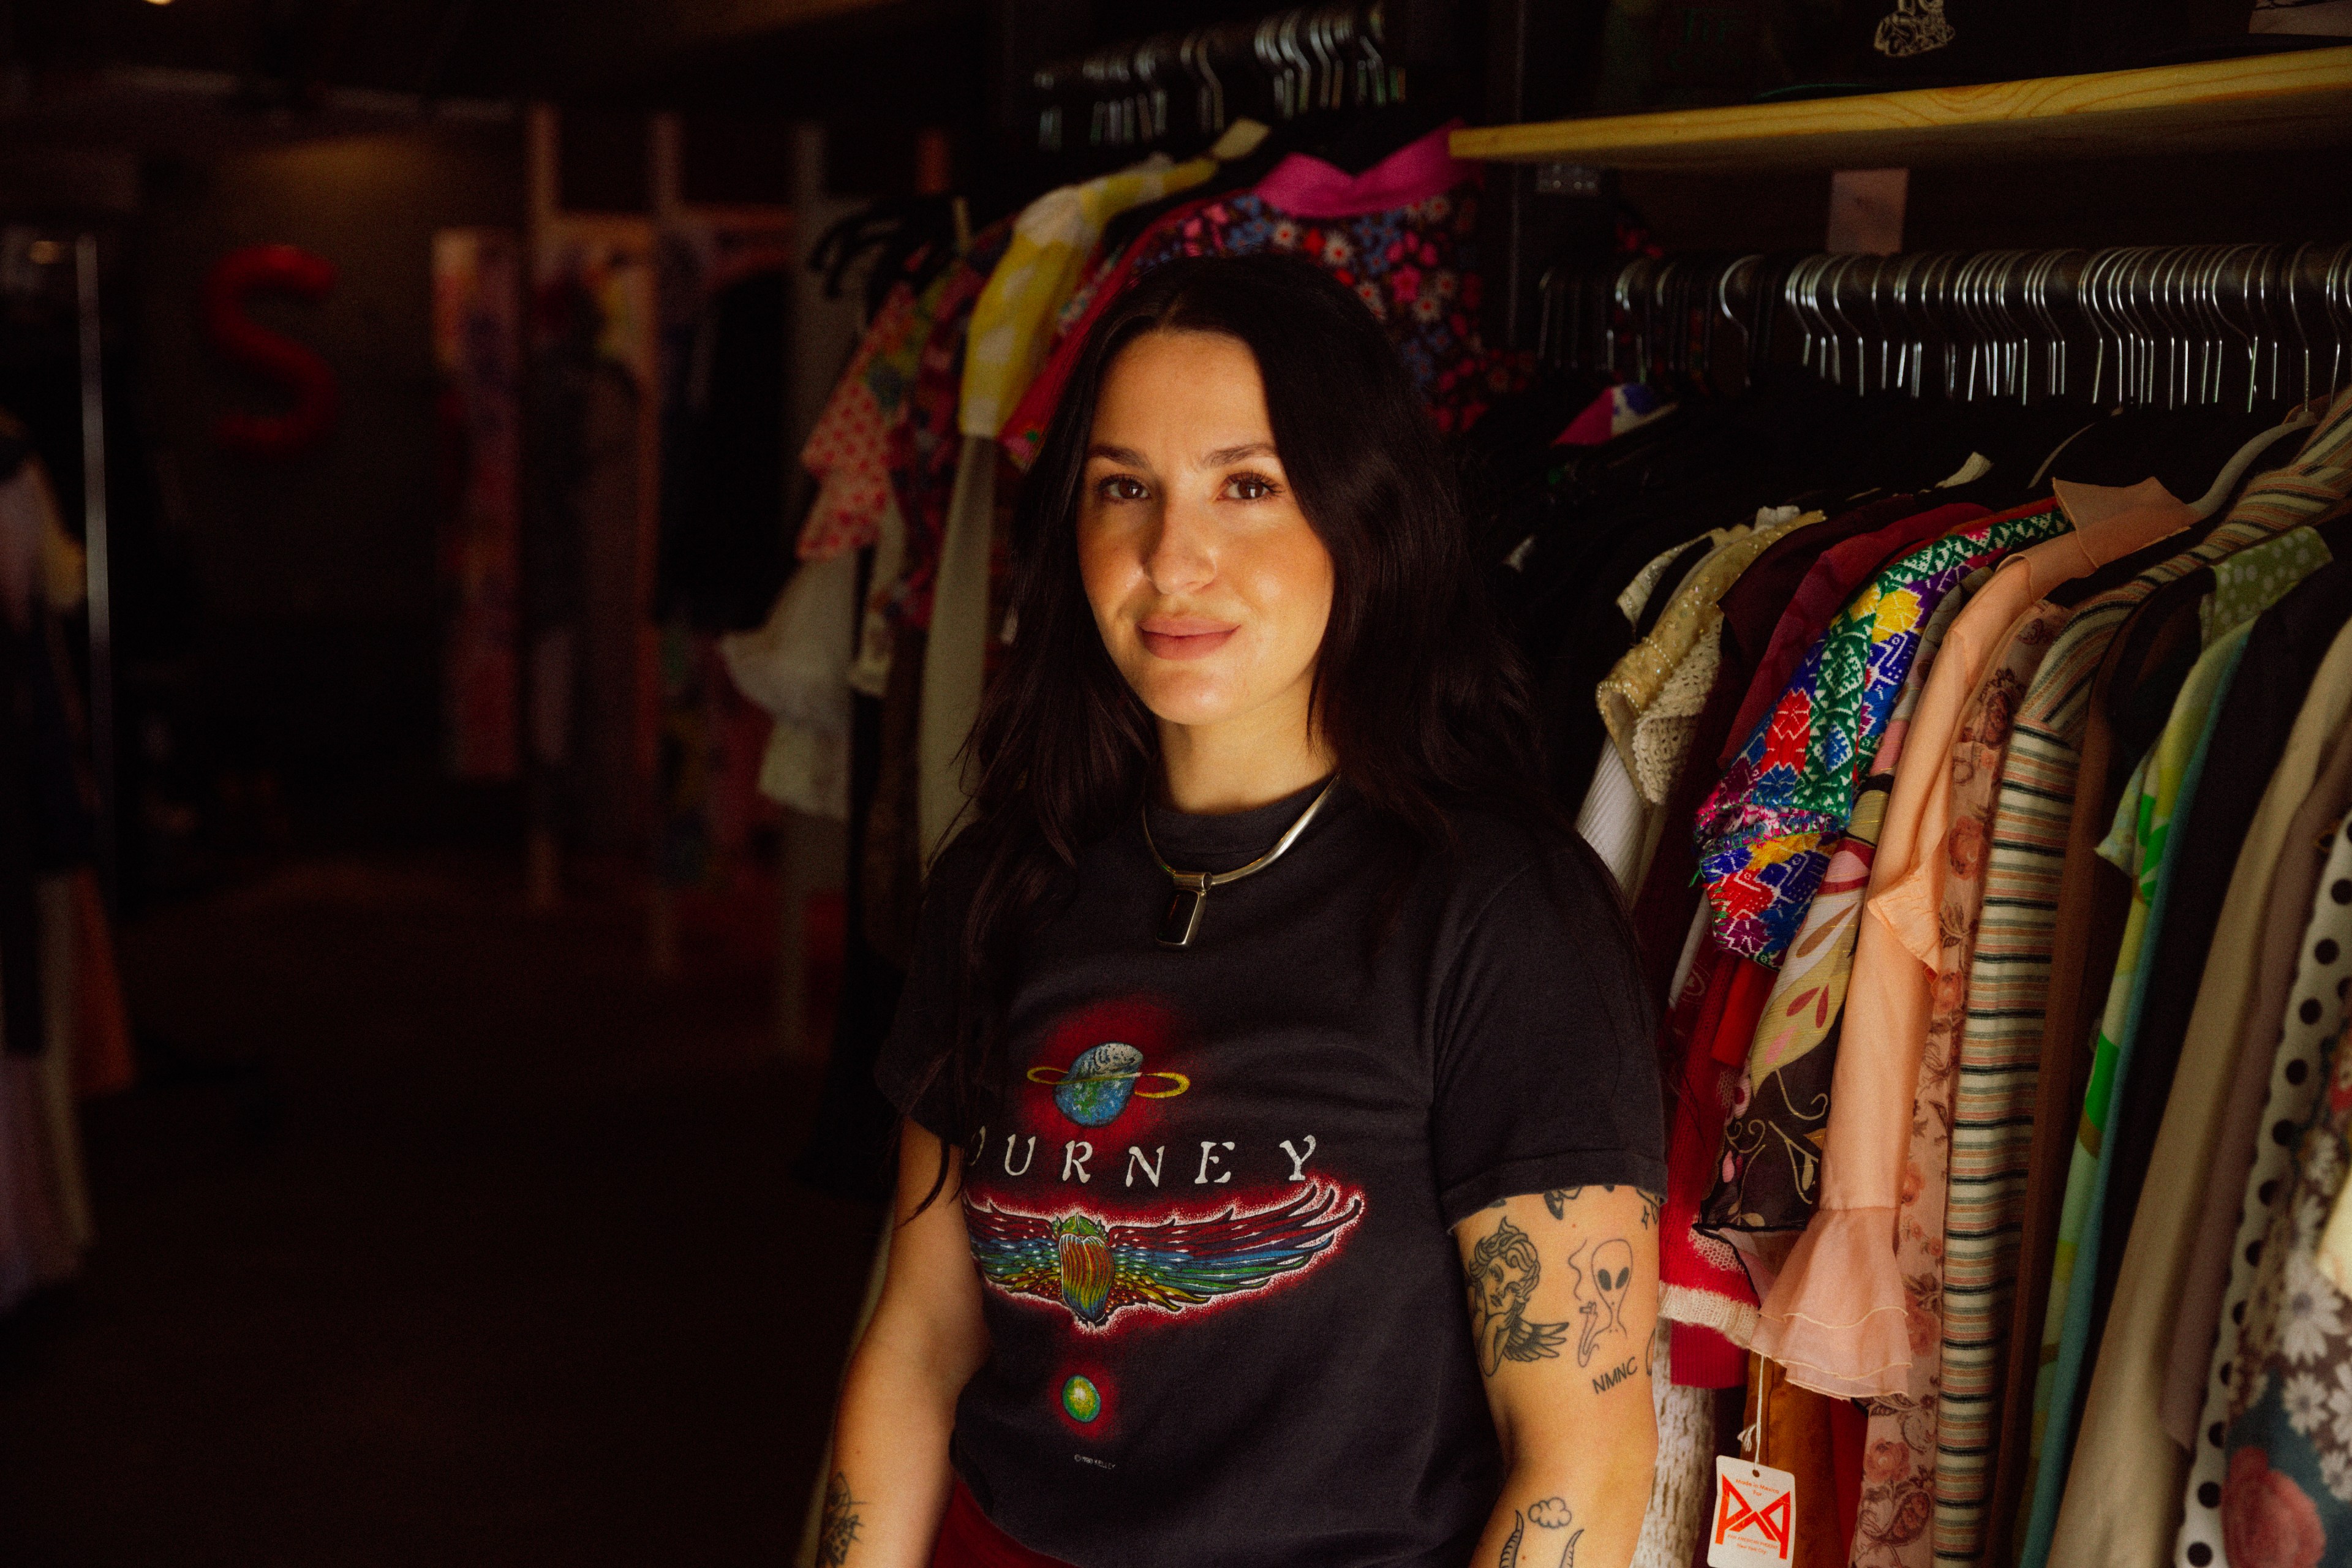 Sensitive Vintage proprietor Sivan Peleg stands in front of racks of clothes inside her pop-up fashion boutique housed in a converted garage in San Francisco's Mission District. 